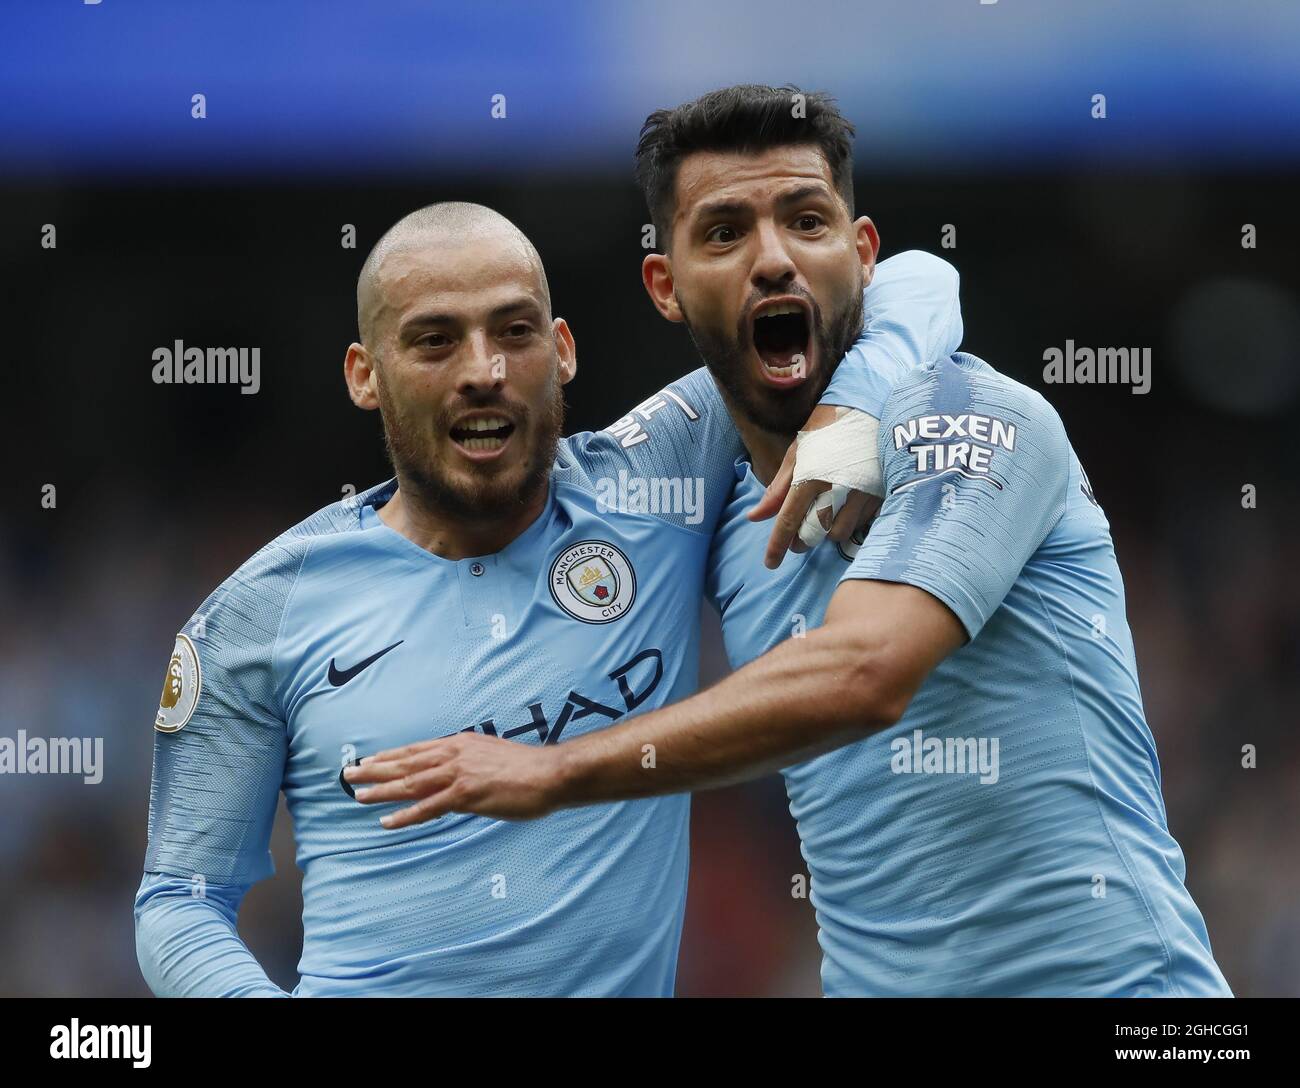 Sergio Aguero of Manchester City (r) celebrates scoring the first goal with David Silva of Manchester City (l) during the Premier League match at the Etihad Stadium, Manchester. Picture date 19th August 2018. Picture credit should read: Simon Bellis/Sportimage via PA Images Stock Photo